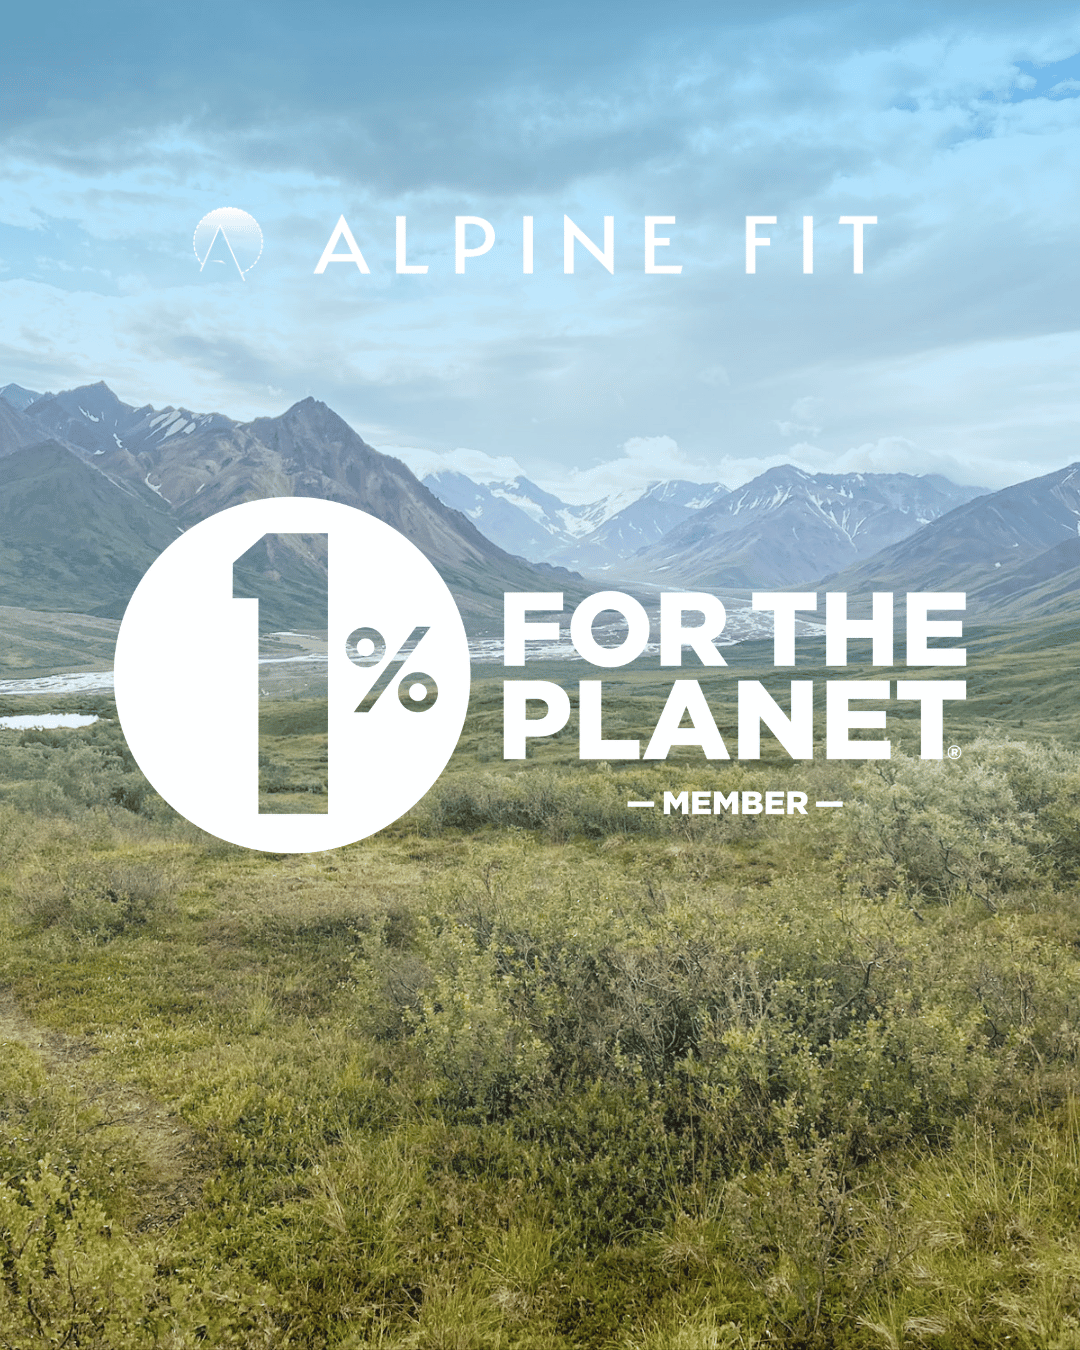 alpine fit one percent for the planet